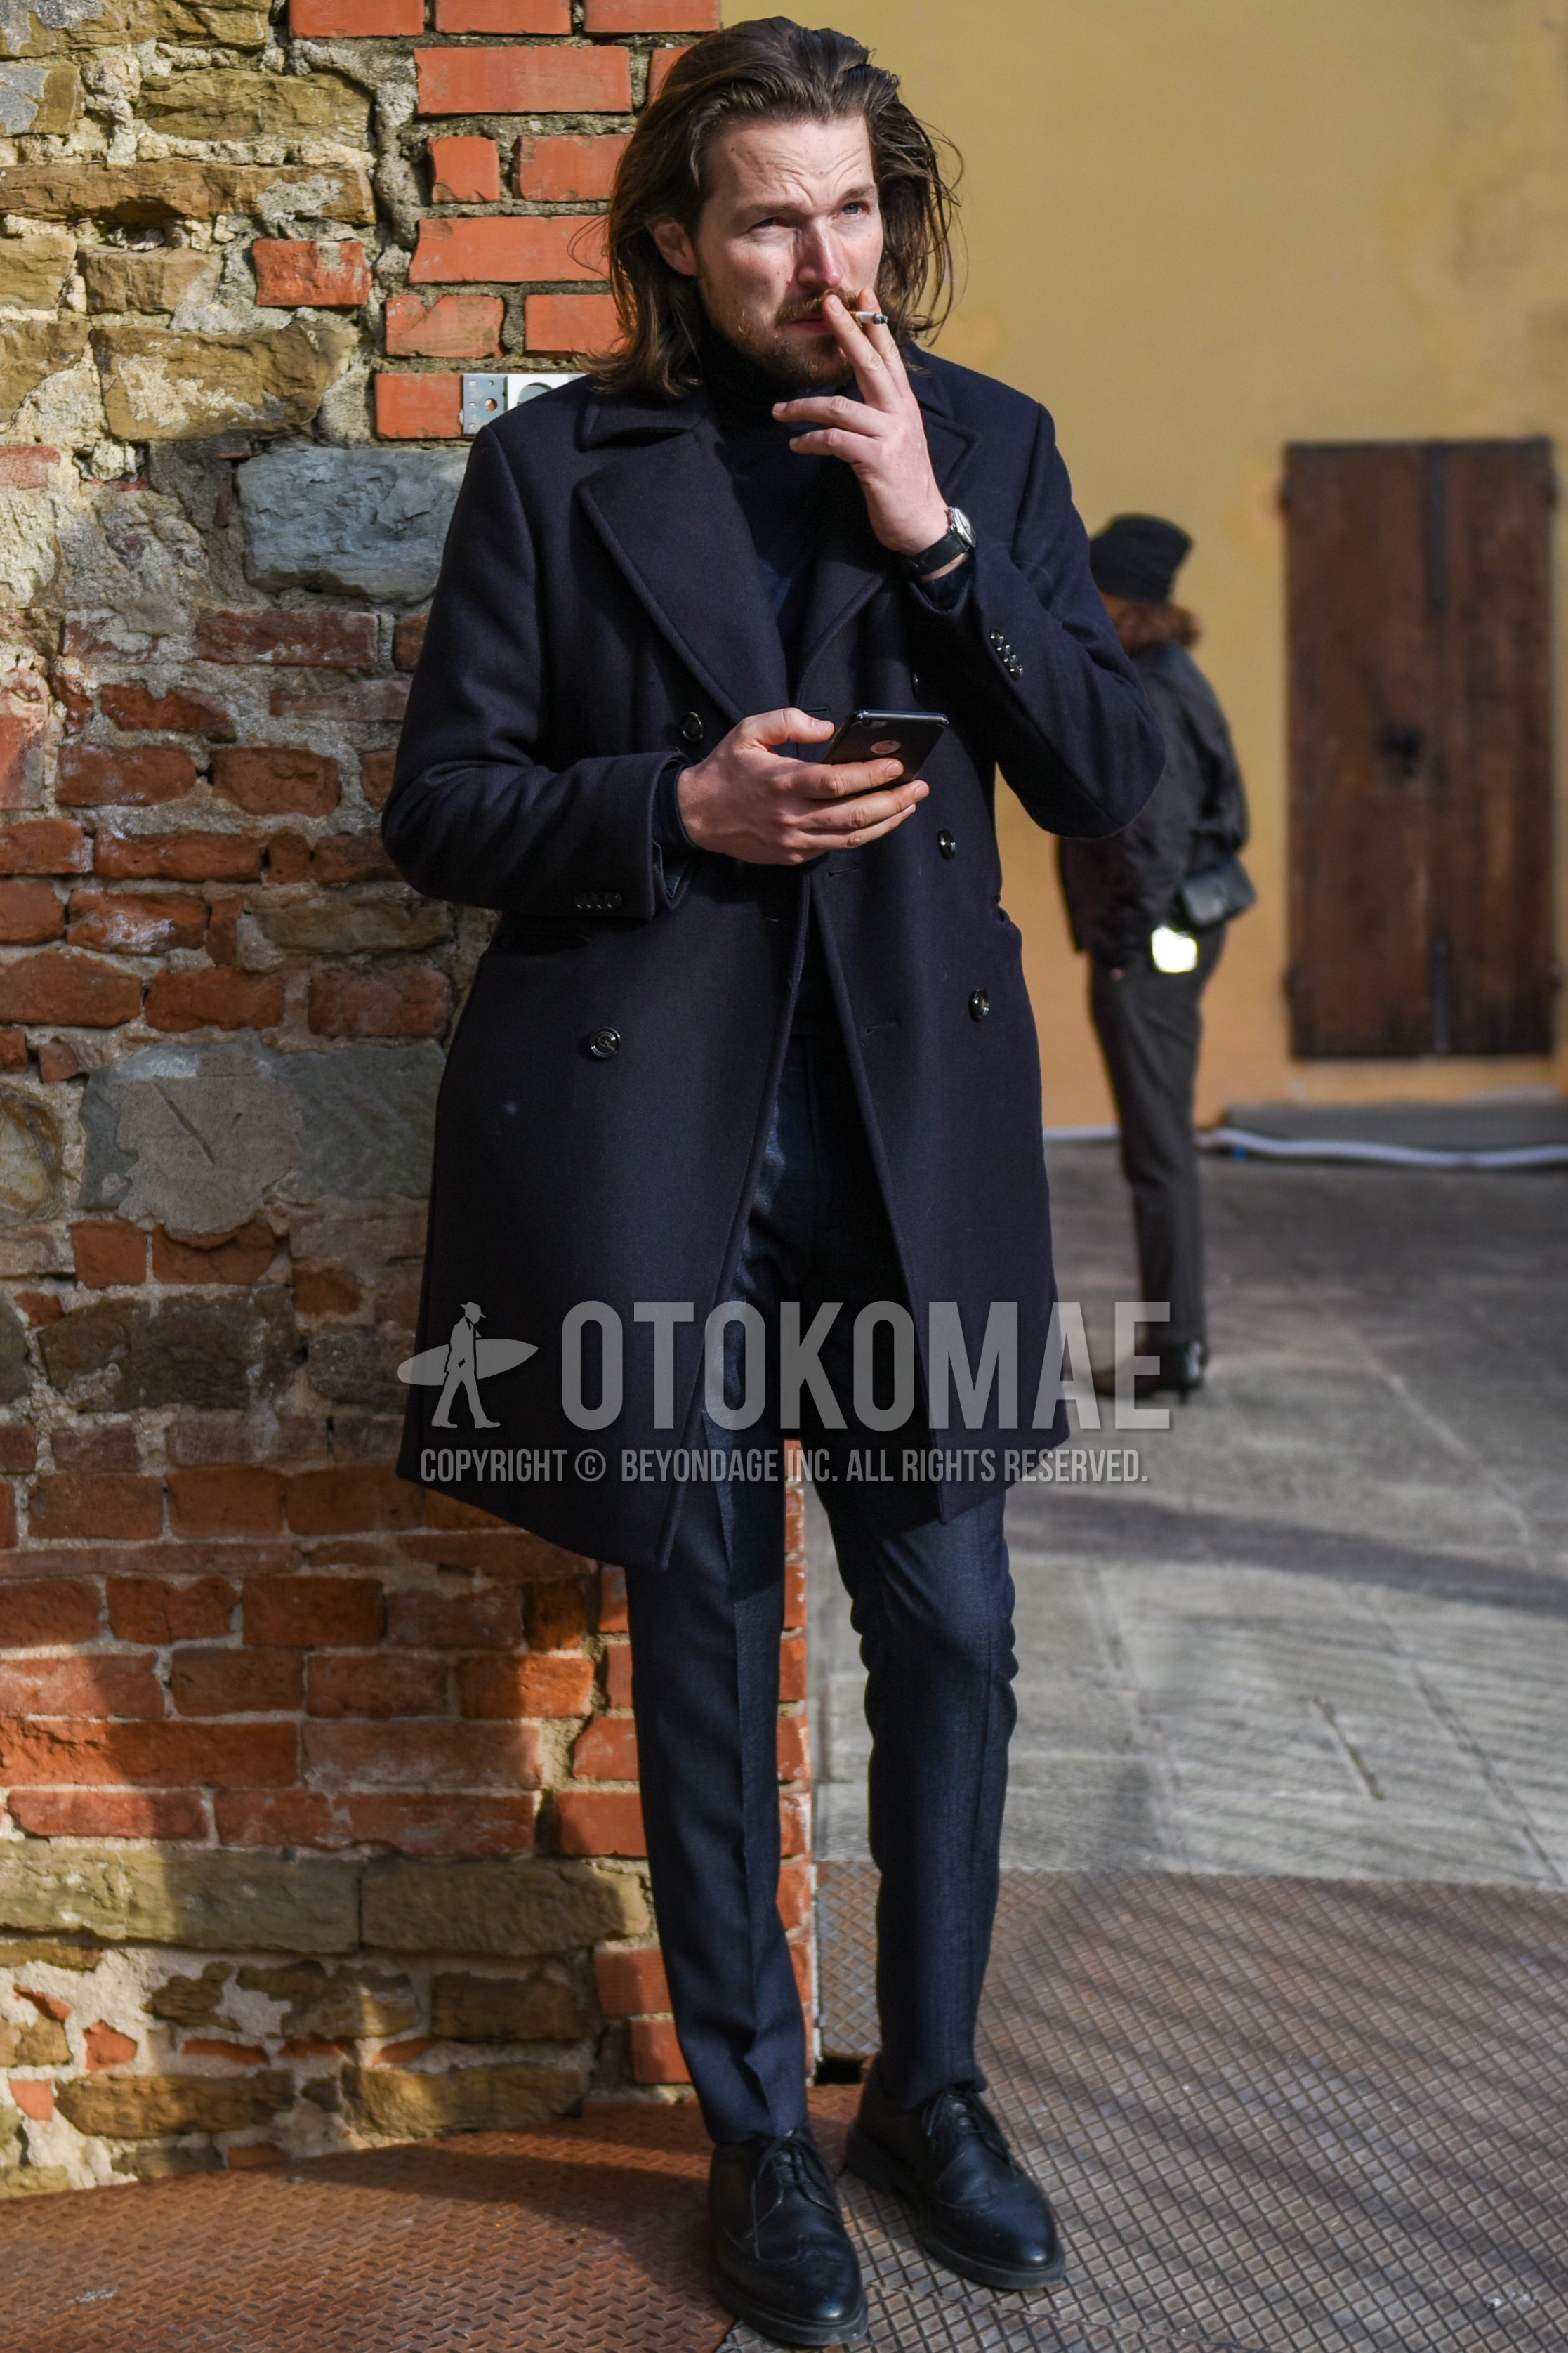 Men's autumn winter outfit with navy plain ulster coat, gray plain slacks, black wing-tip shoes leather shoes.